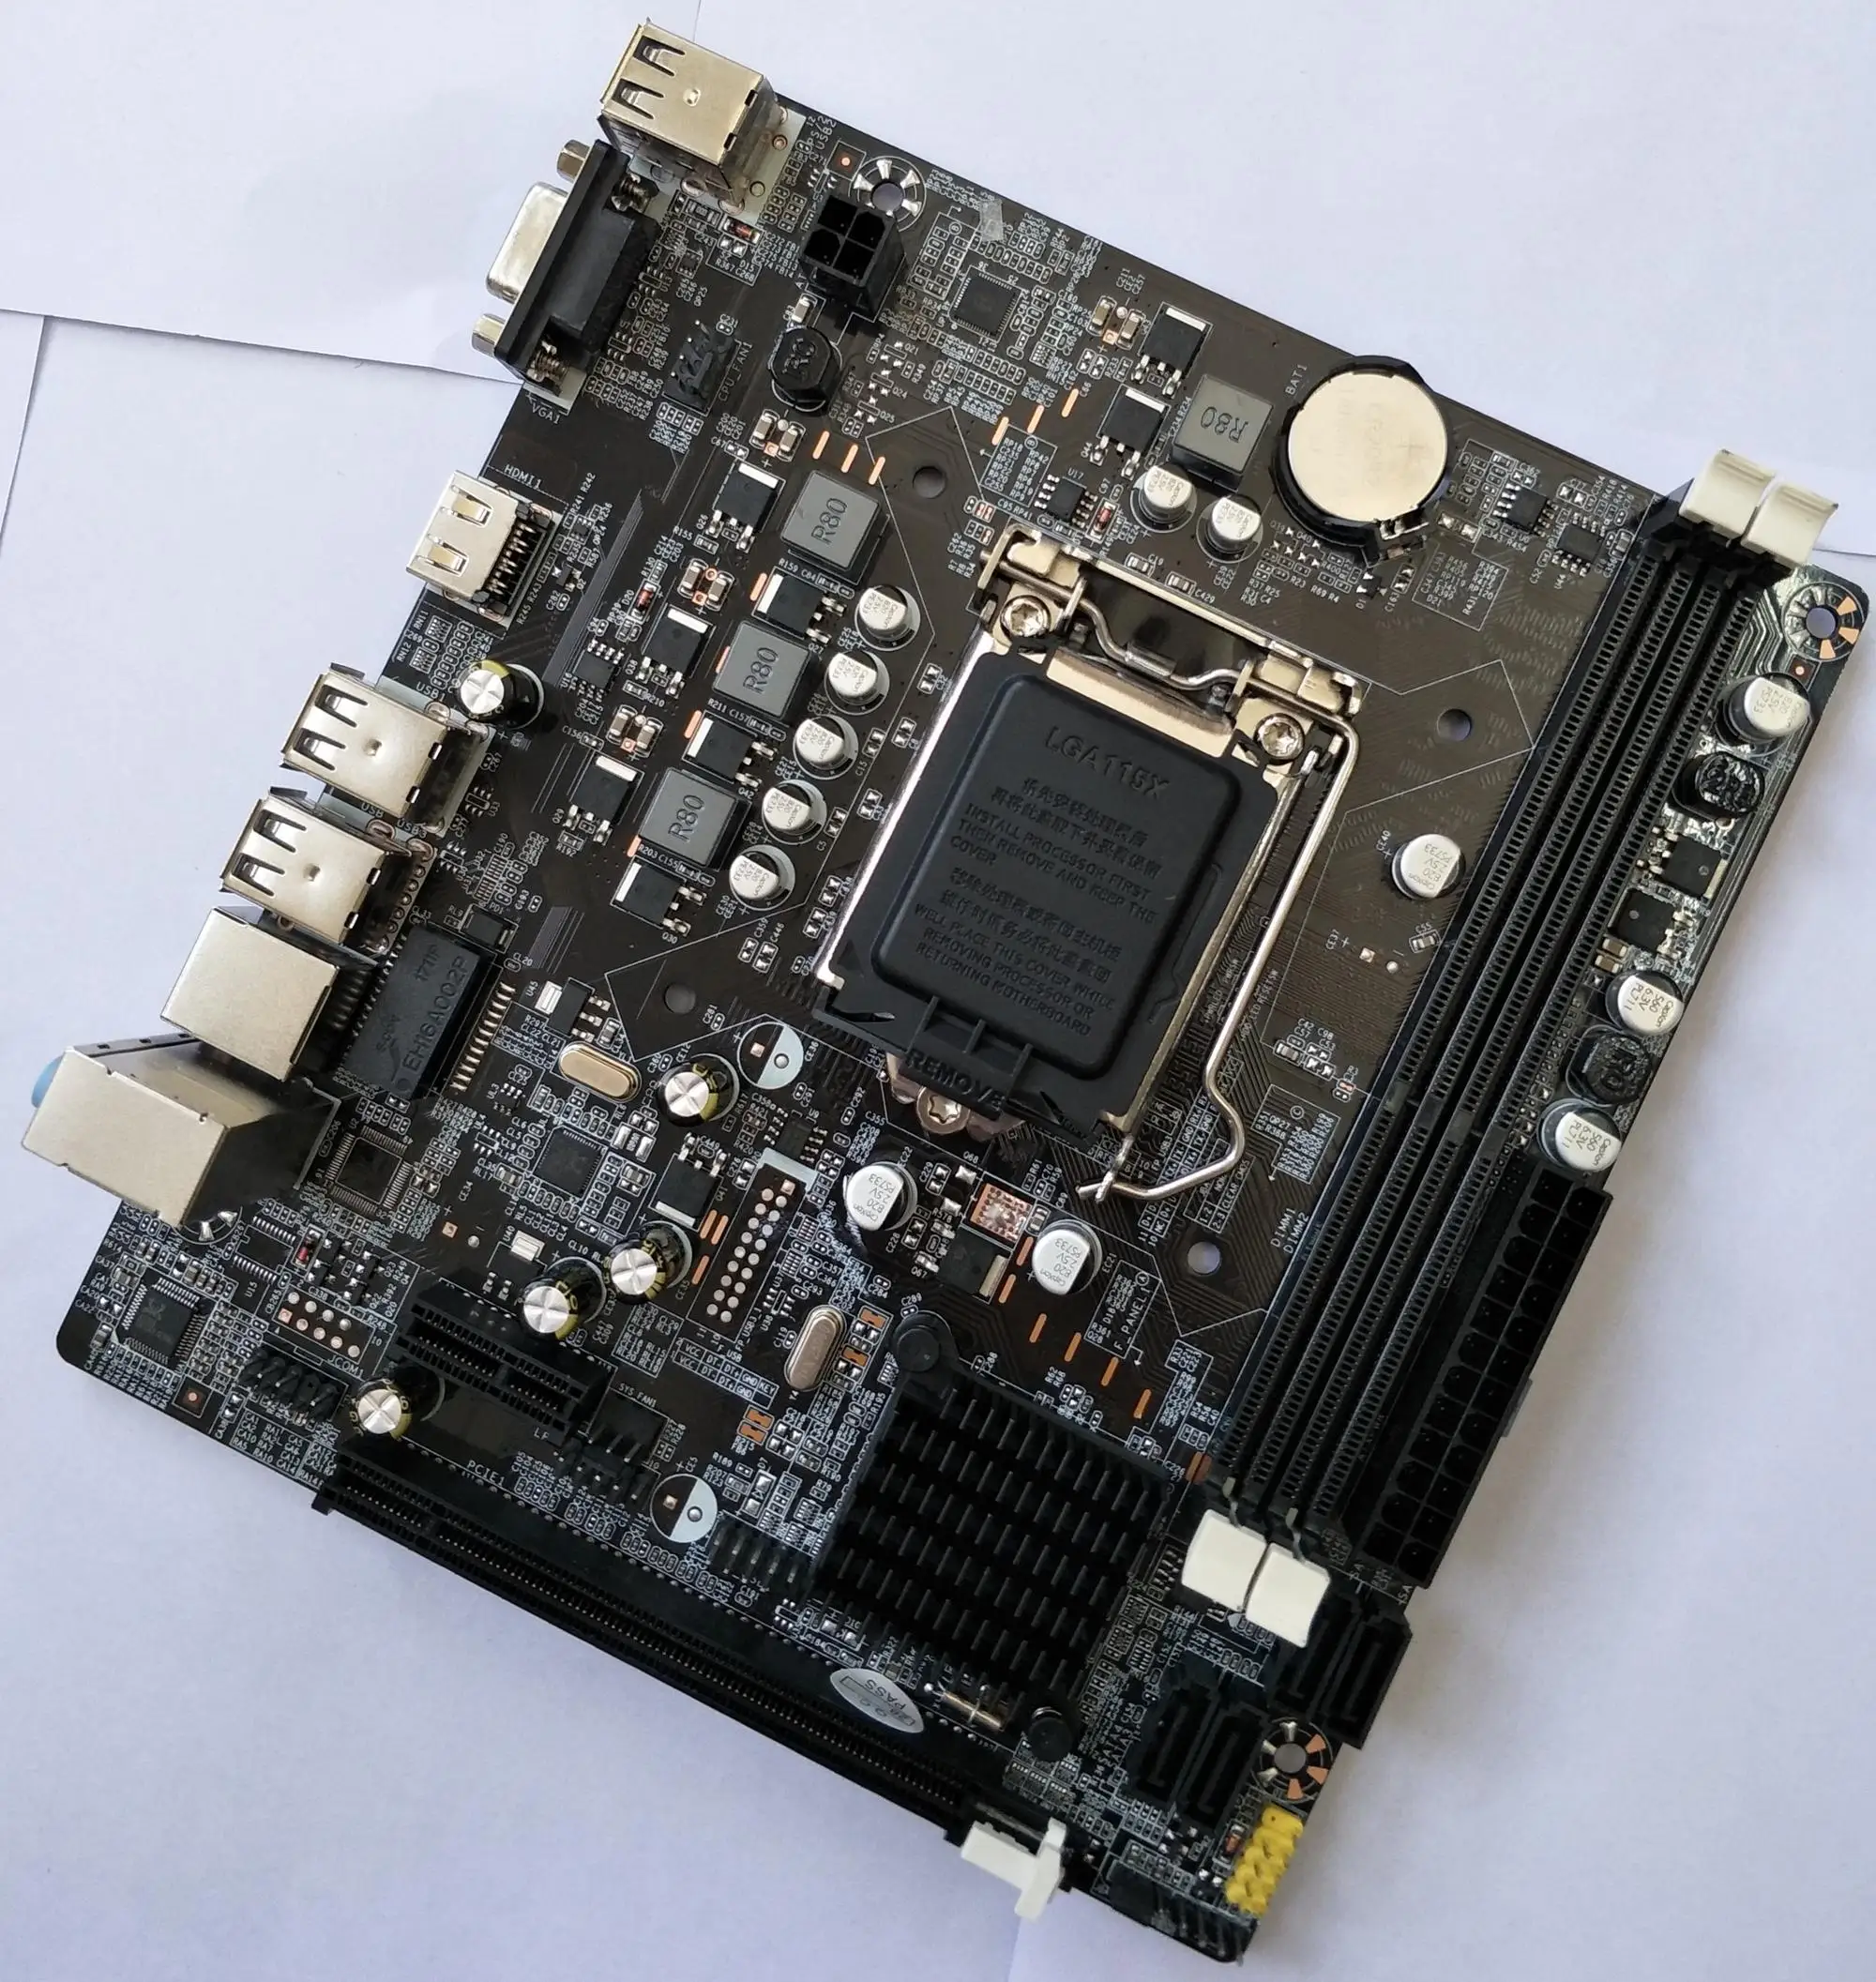 H61 motherboard supported processor list